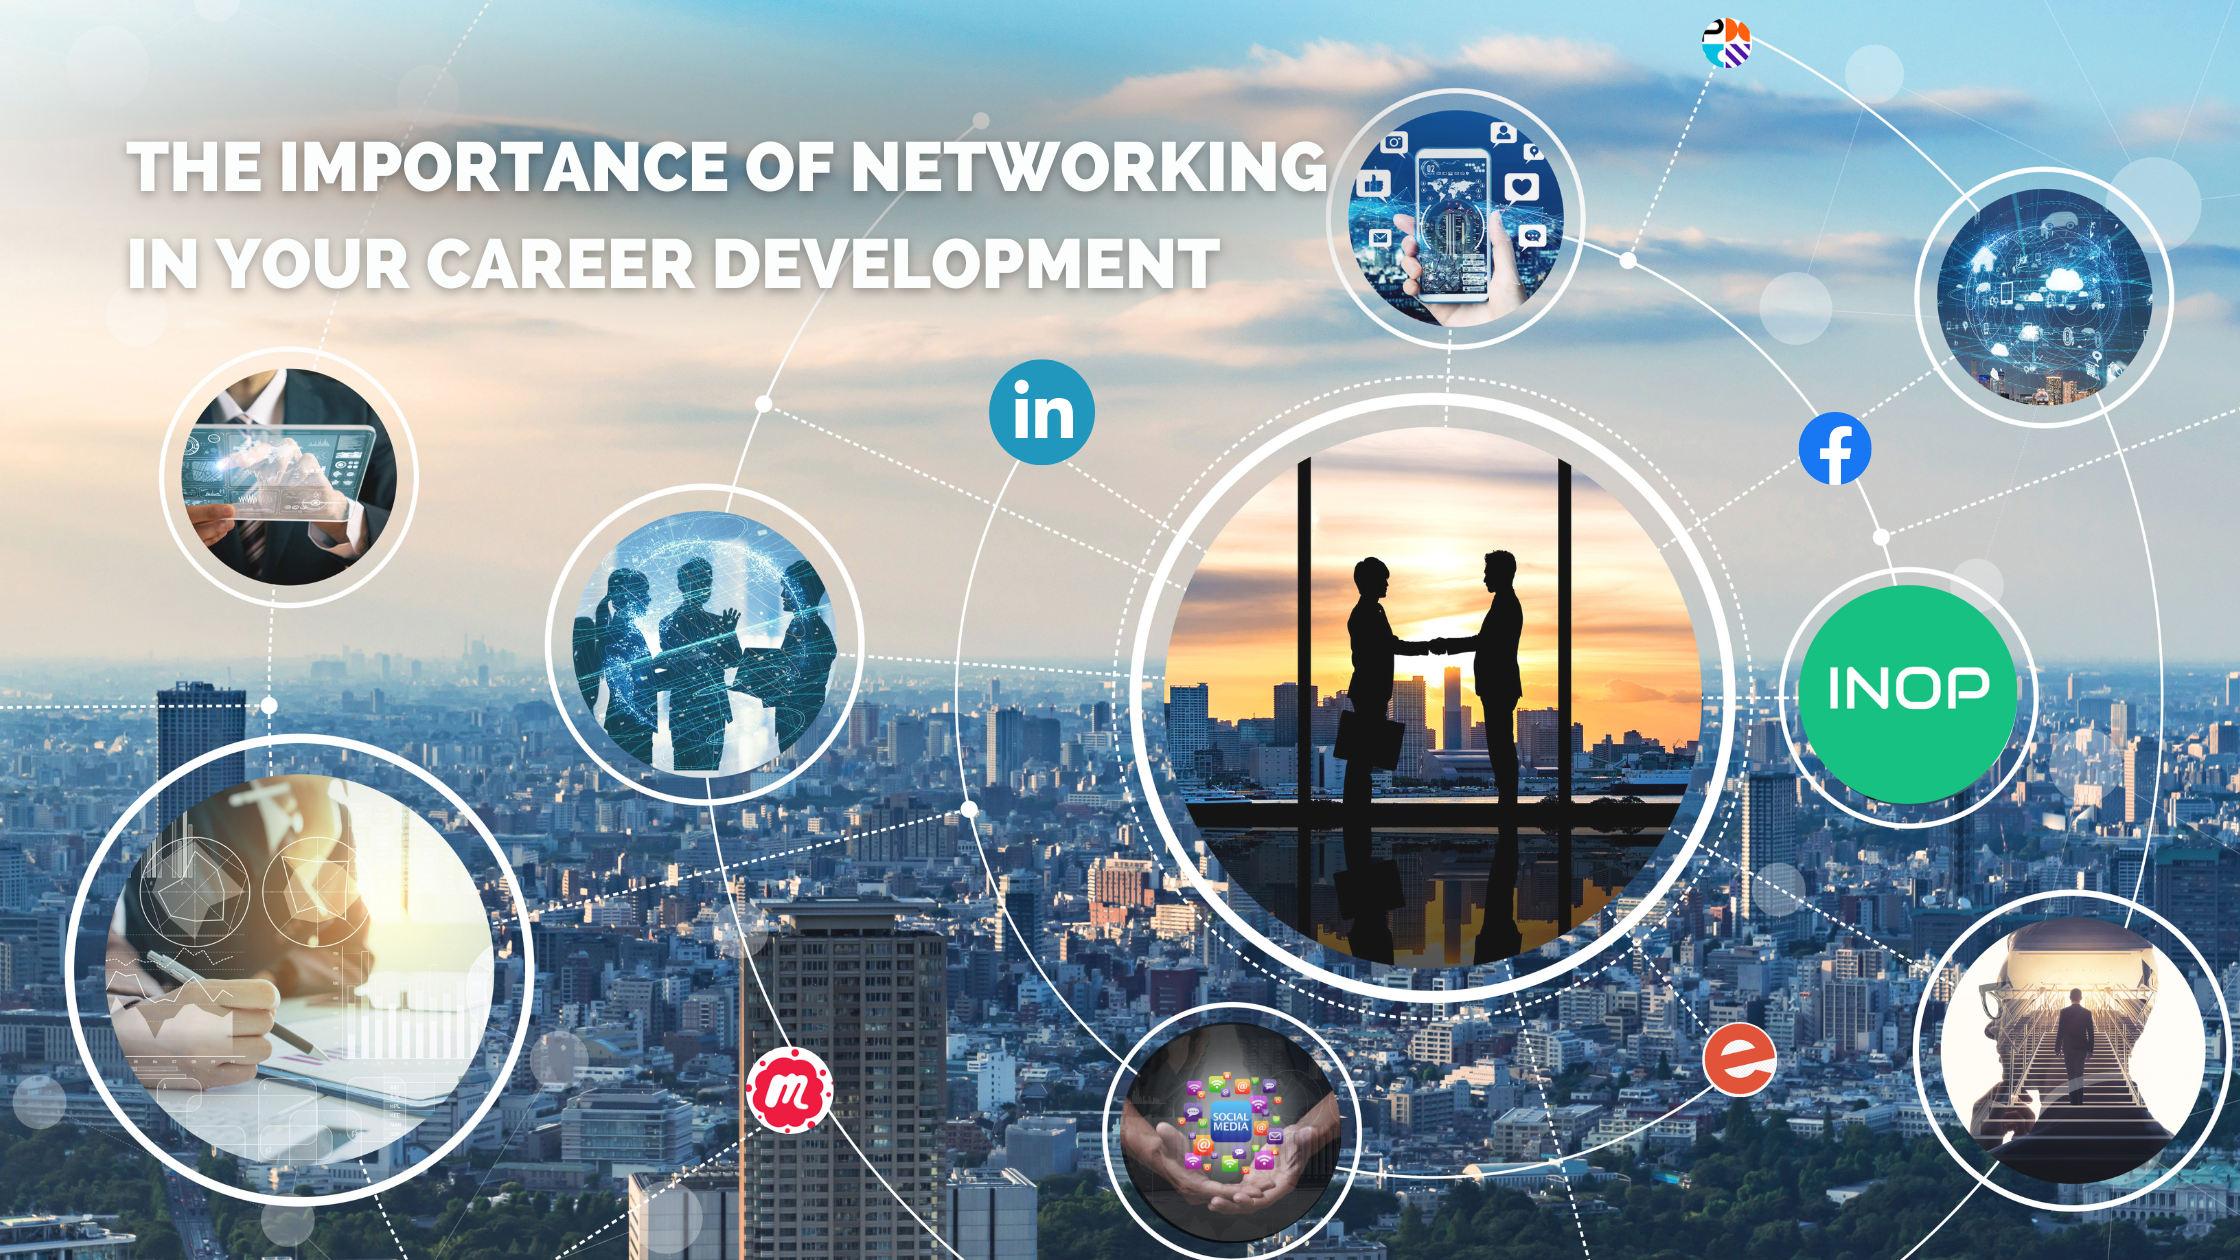 Networking is important for career development